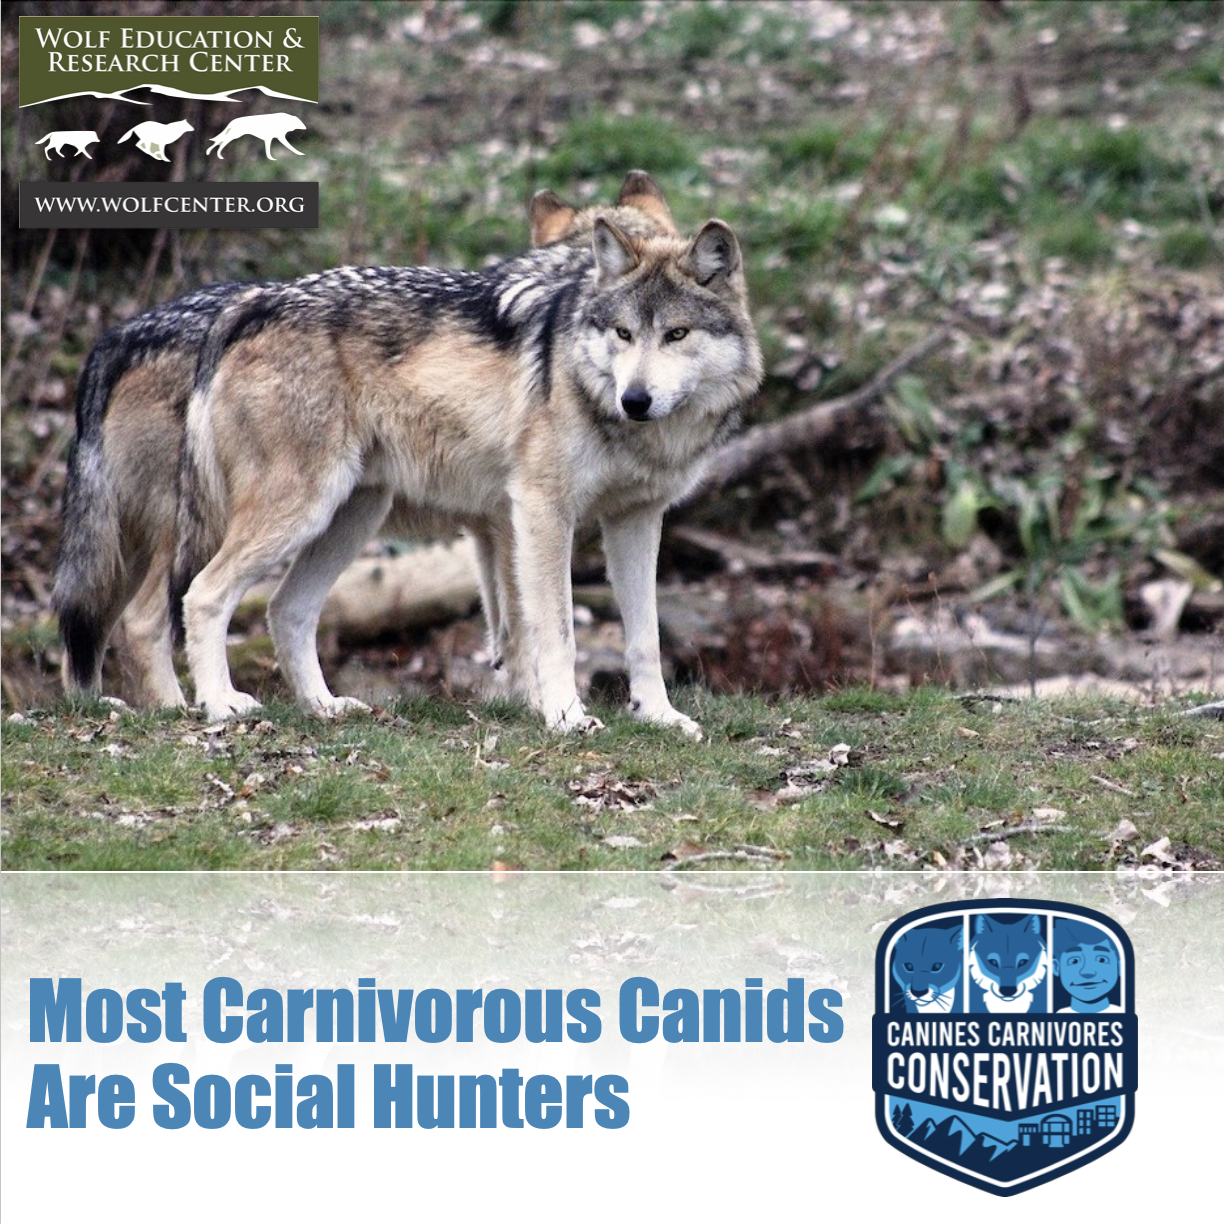 Helping You Make The Argument to Save Wolves - The Wolf Center